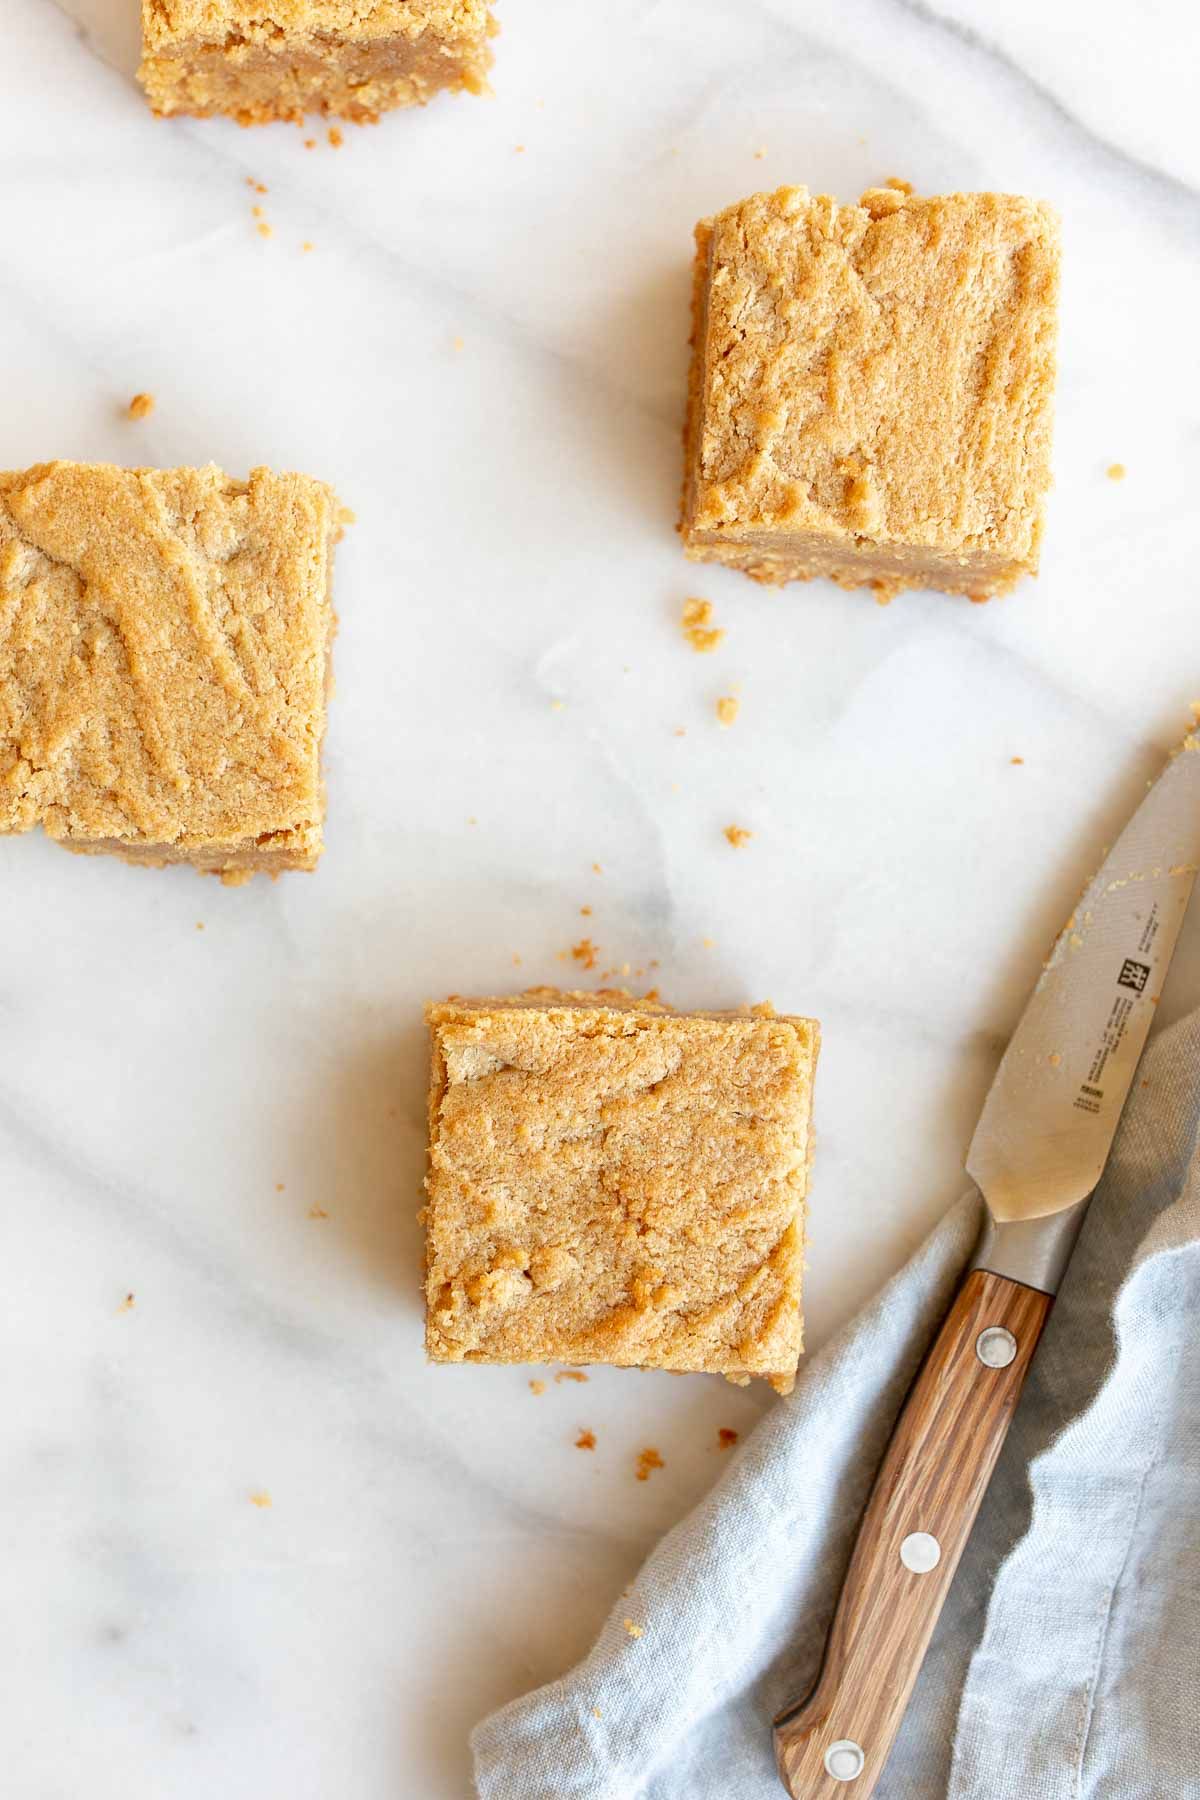 Peanut butter brownies cut into squares and spread out on a marble surface